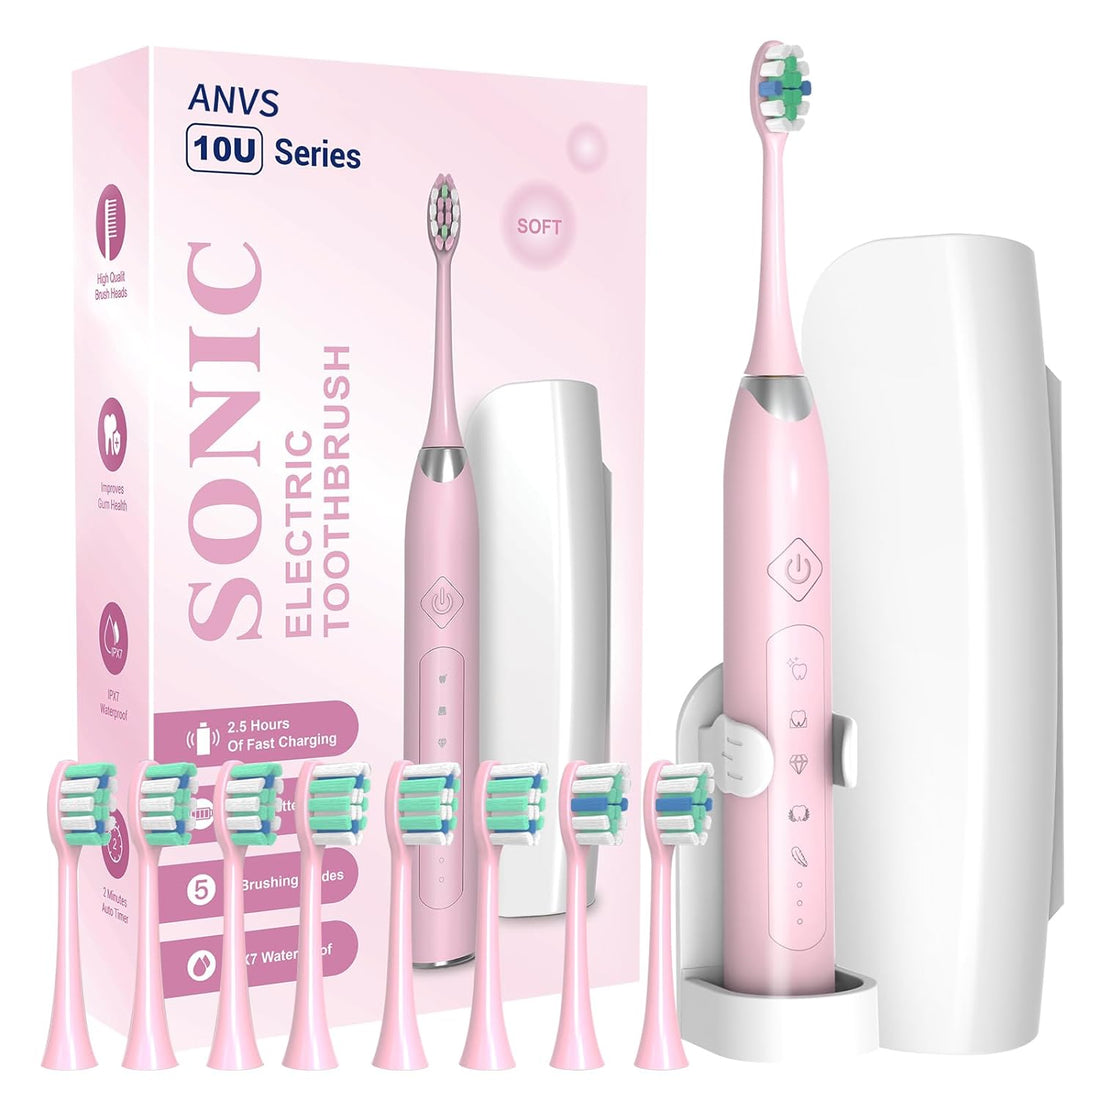 ANVS Sonic Electric Toothbrushes for Adults, 8 Brush Heads Electric Toothbrush Deep Clean 5 Modes, Rechargeable Travel Toothbrushes Fast Charge with 2 Minutes Smart Timer(Pink)